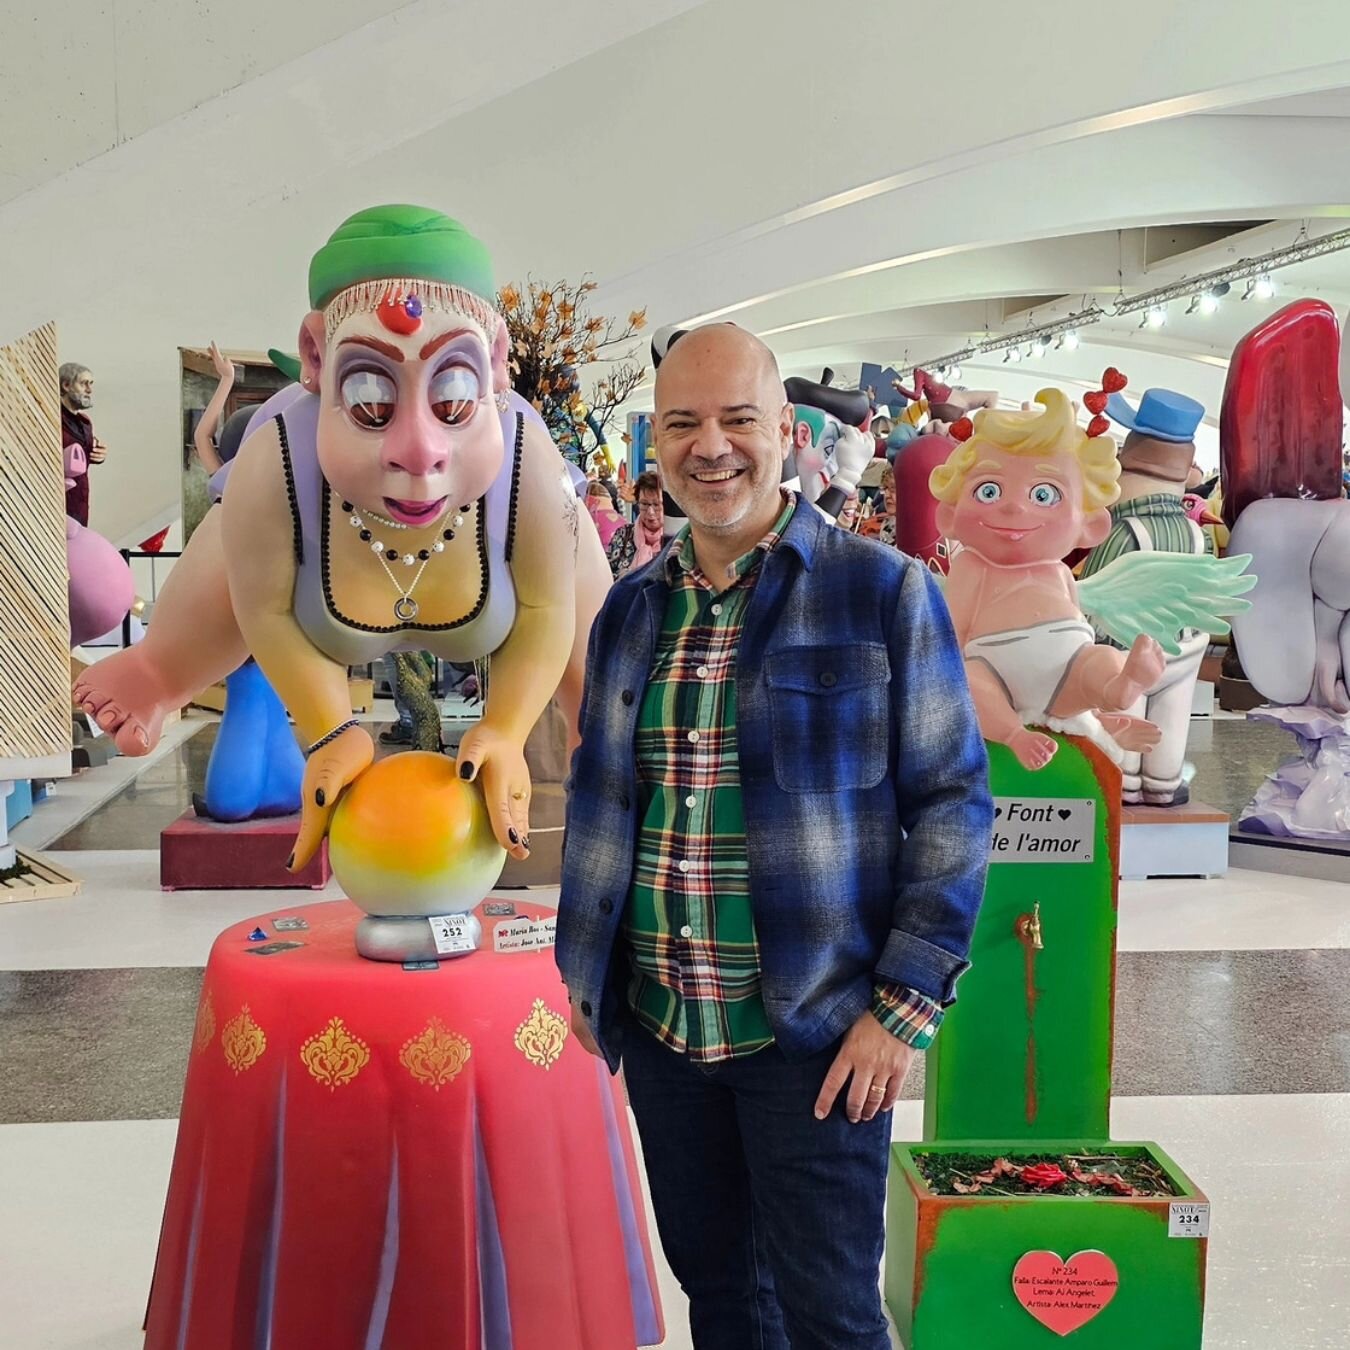 Fallas Festival Ninot Exhibition: The Ninot Exhibition brings together hundreds of the ninots (figures) that make up the Fallas festival monuments. All of them have been submitted by Valencia&rsquo;s Fallas committees, in the hope that their ninot wi